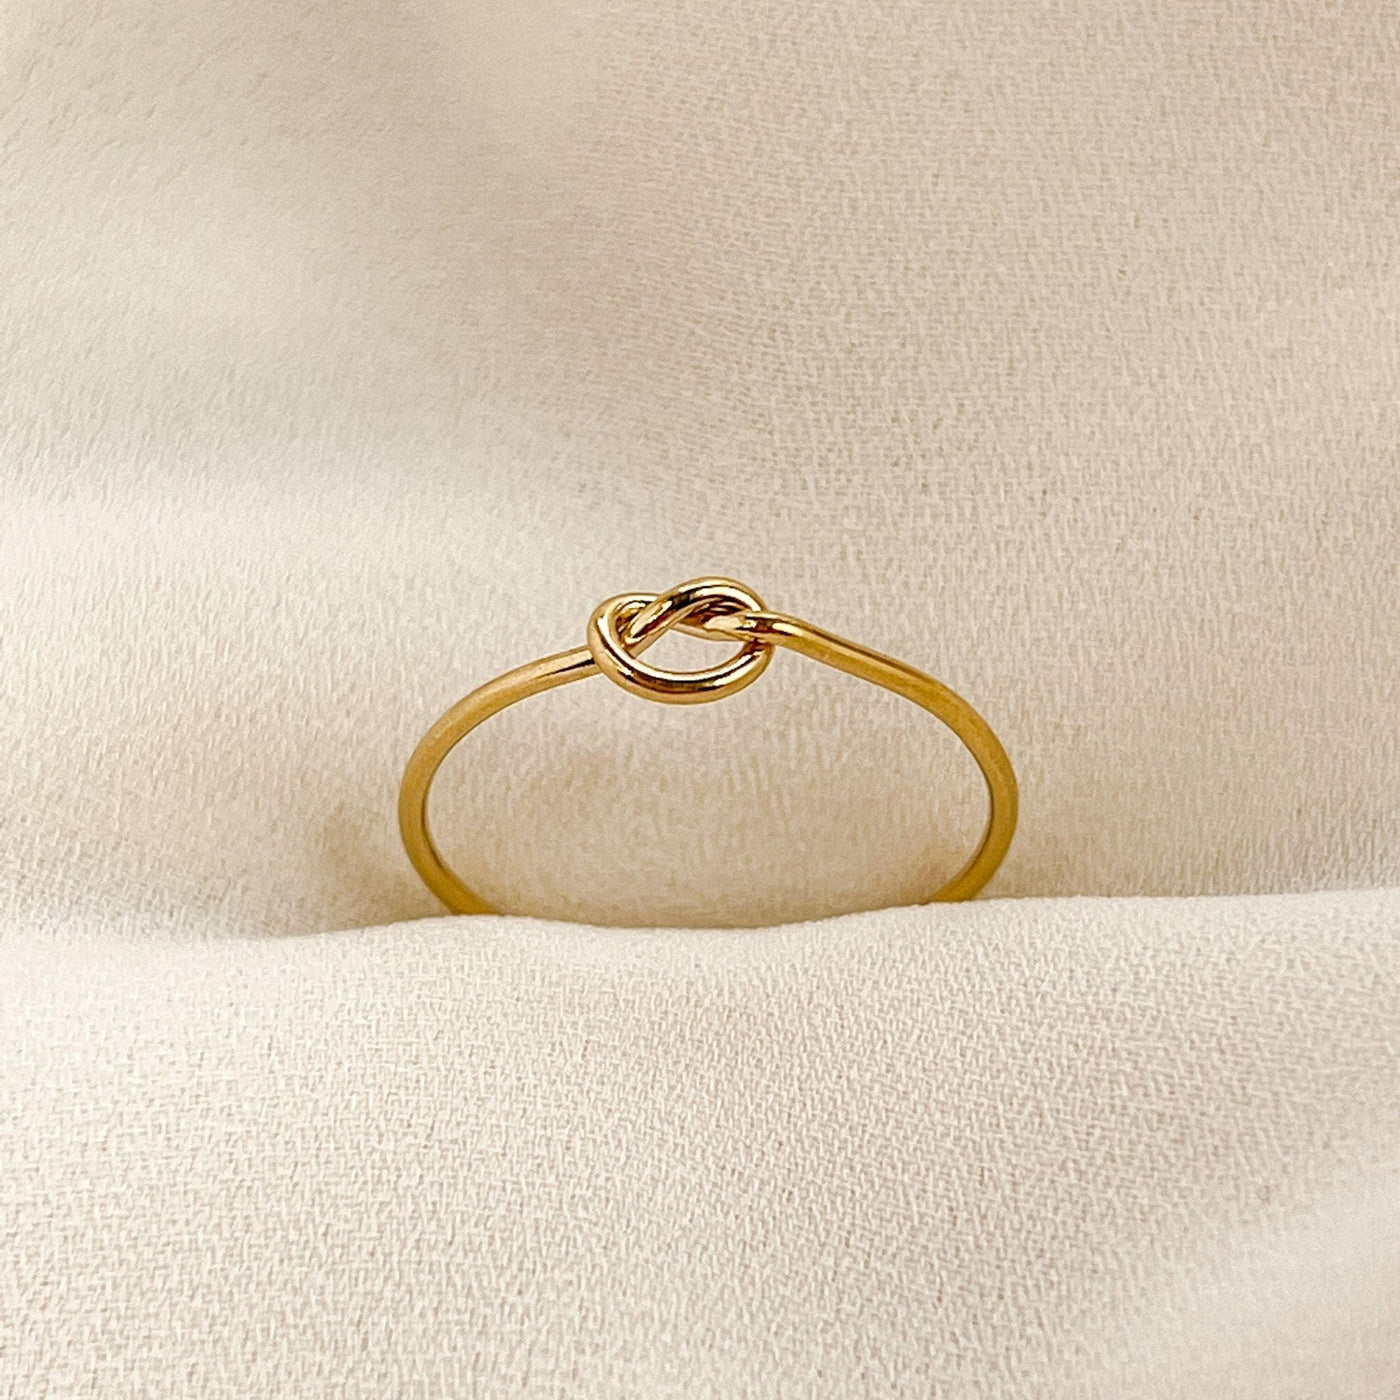 14K gold filled band ring with knot shaped accent. Ring is on cream coloured fabric